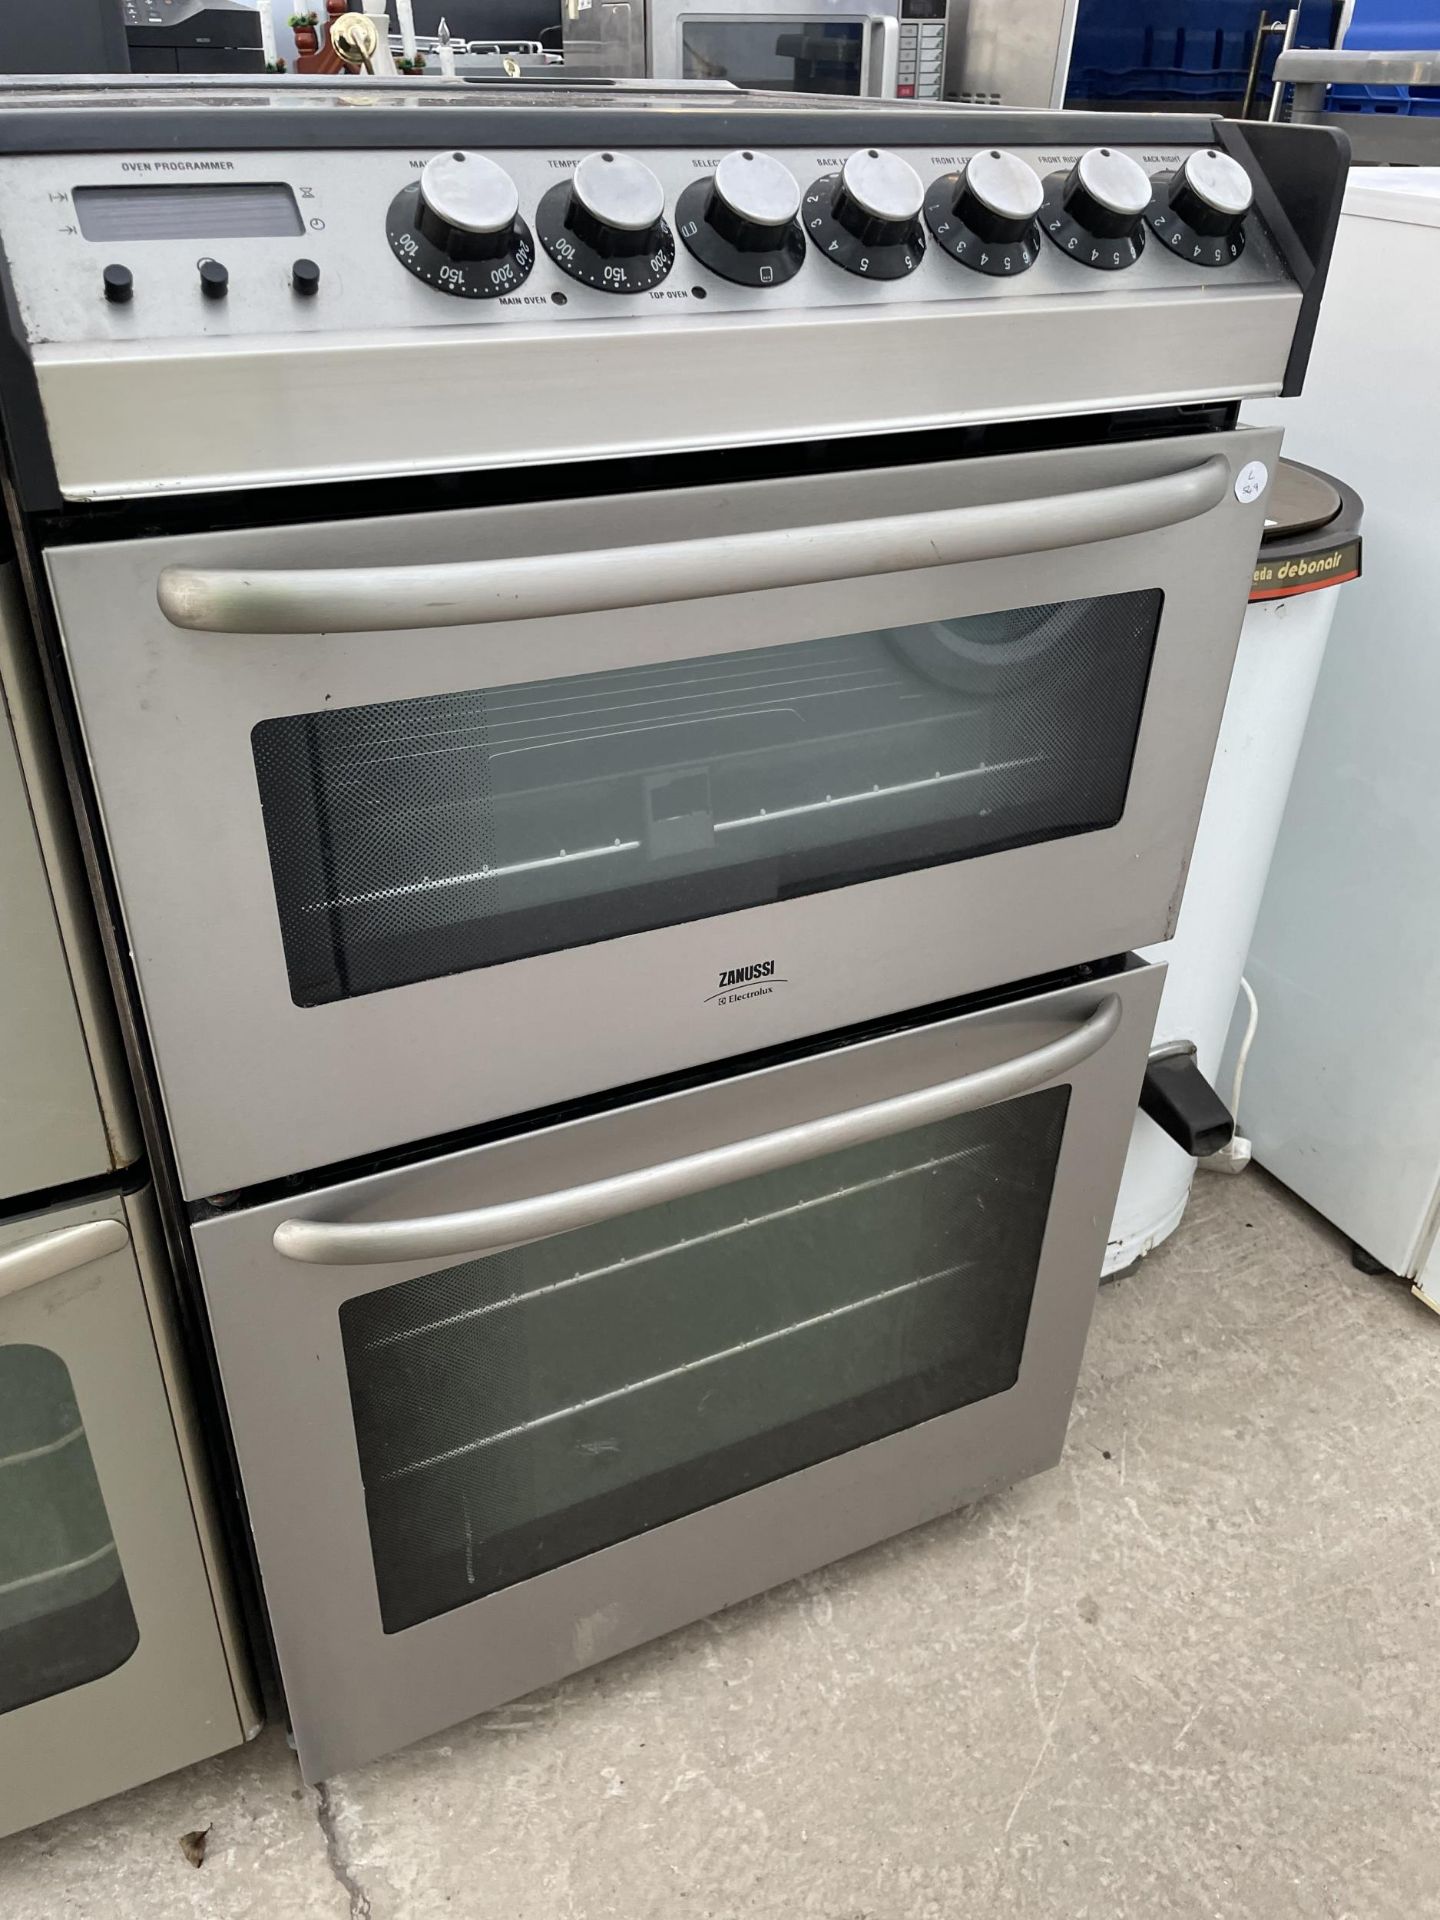 A SILVER ZANUSSI FREESTANDING ELECTRIC OVEN AND HOB - Image 2 of 3